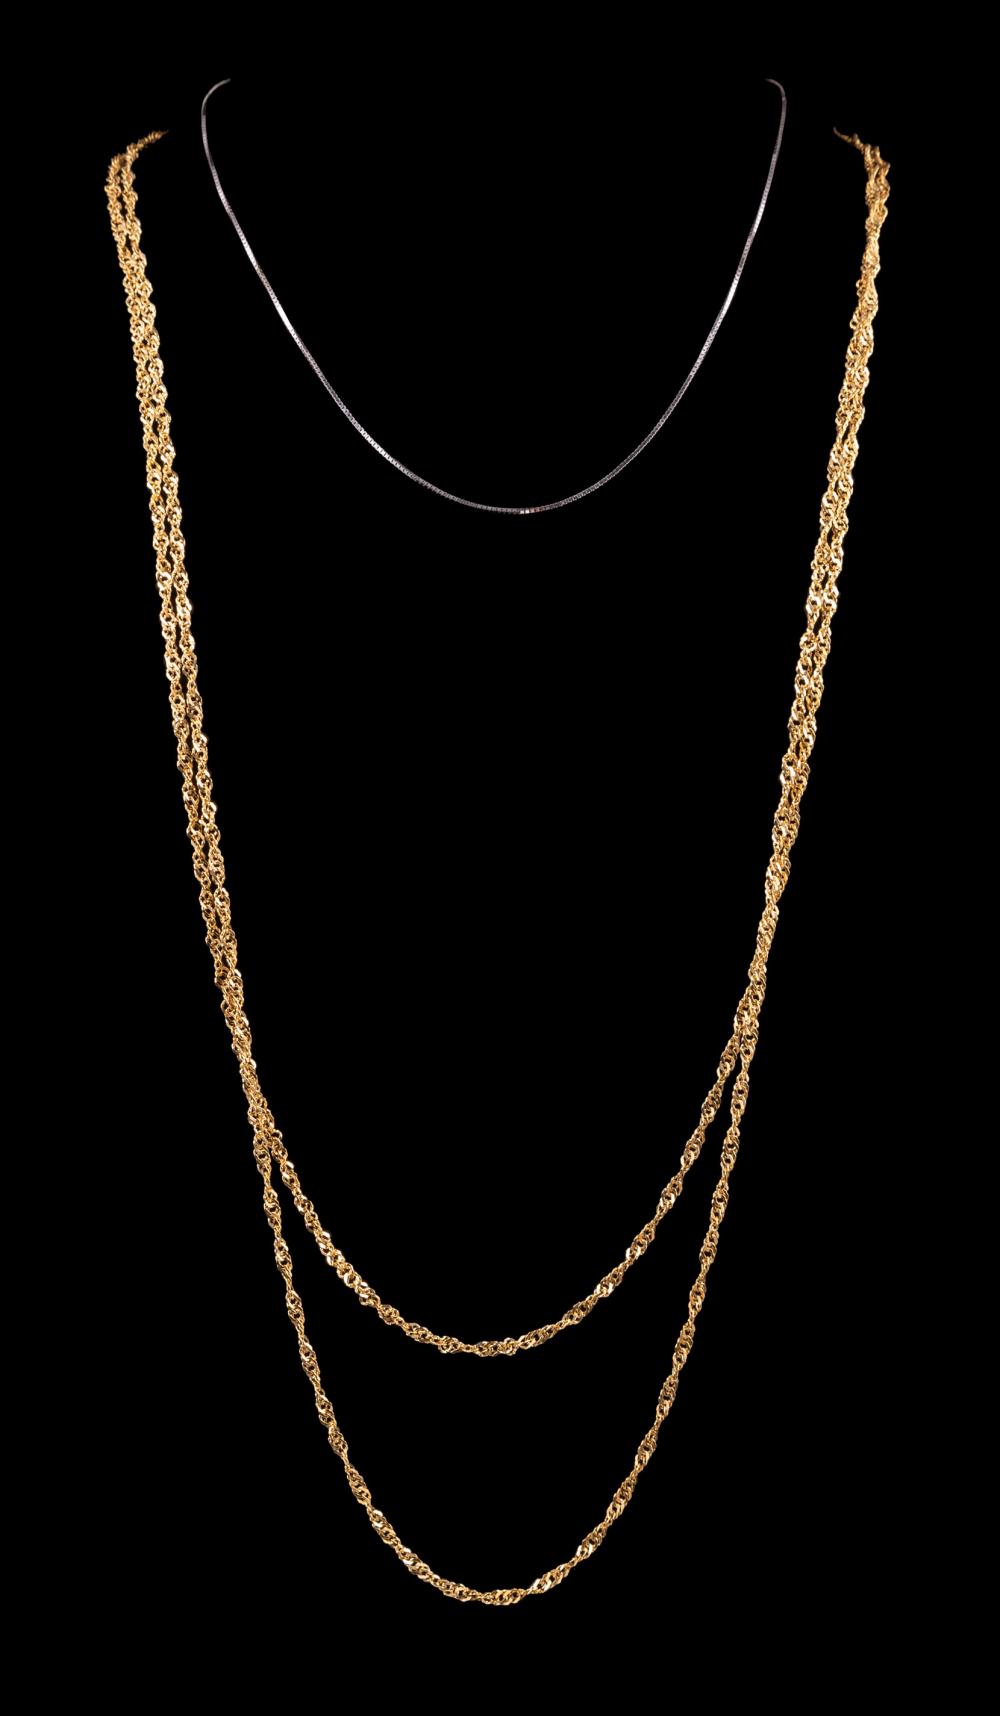 14 KT. YELLOW GOLD LONG NECK CHAIN14